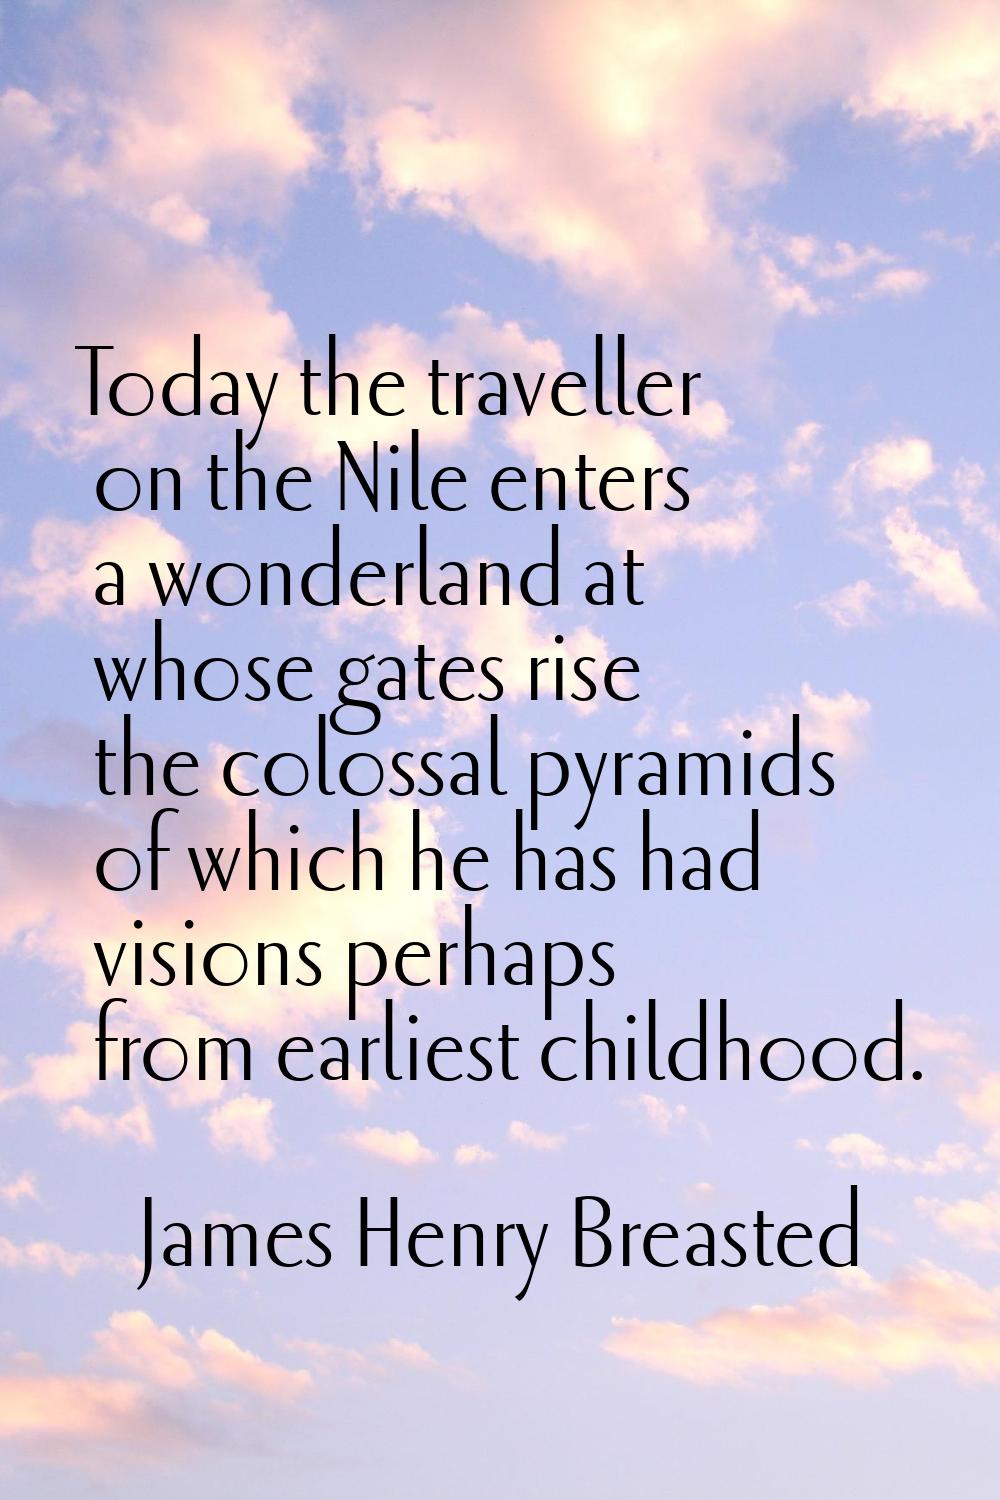 Today the traveller on the Nile enters a wonderland at whose gates rise the colossal pyramids of wh